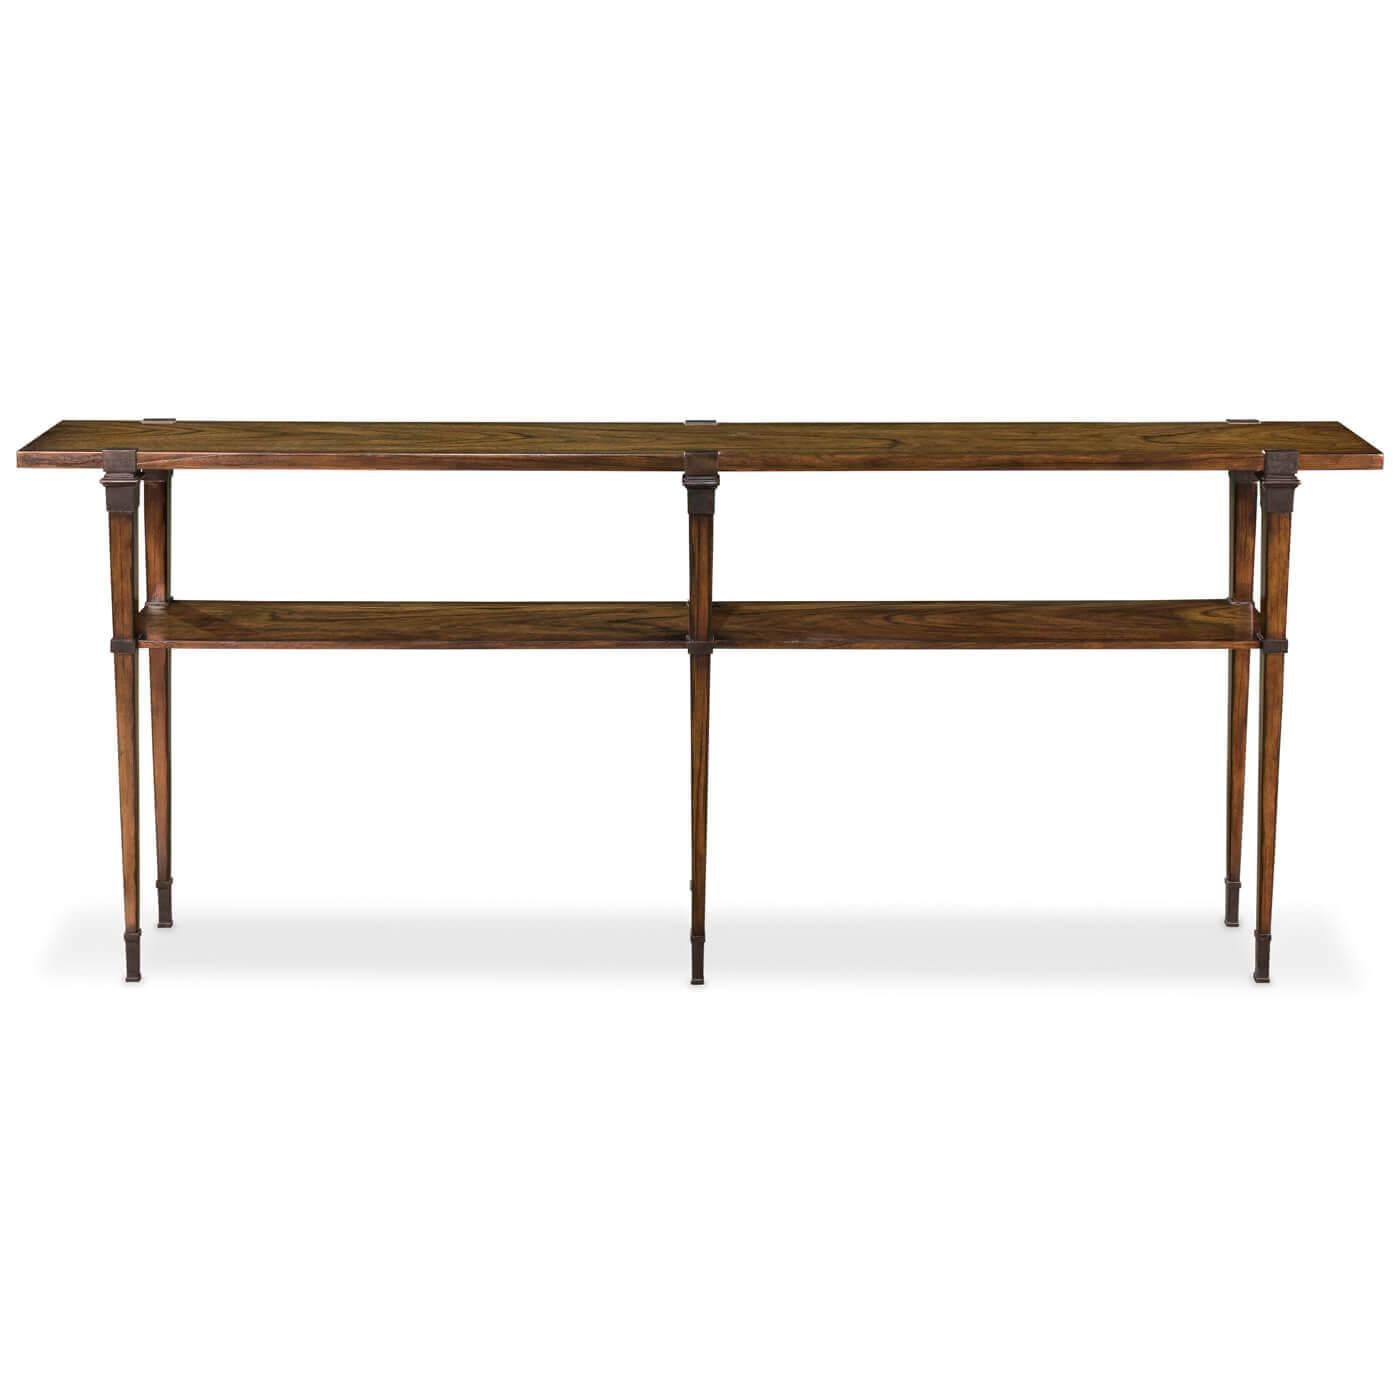 A modern plank top console table in a warm walnut finish. This long and narrow console has a beautiful wood plank top and one shelf suspended with bronze brackets. It sits on slender legs with cast bronze feet. 

Dimensions: 80